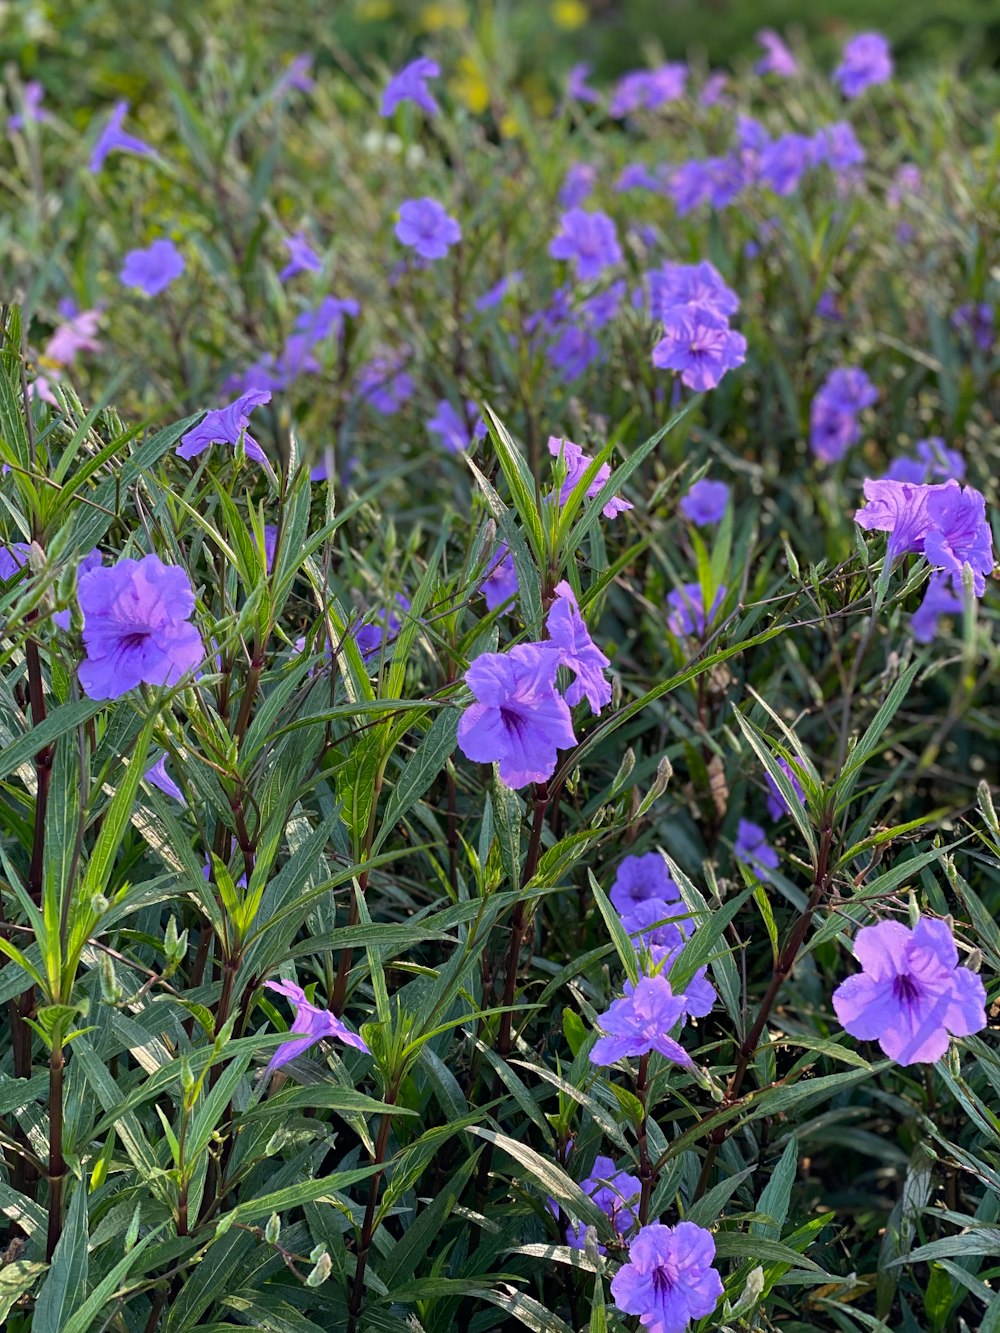 purple flowers in green grass field during daytime